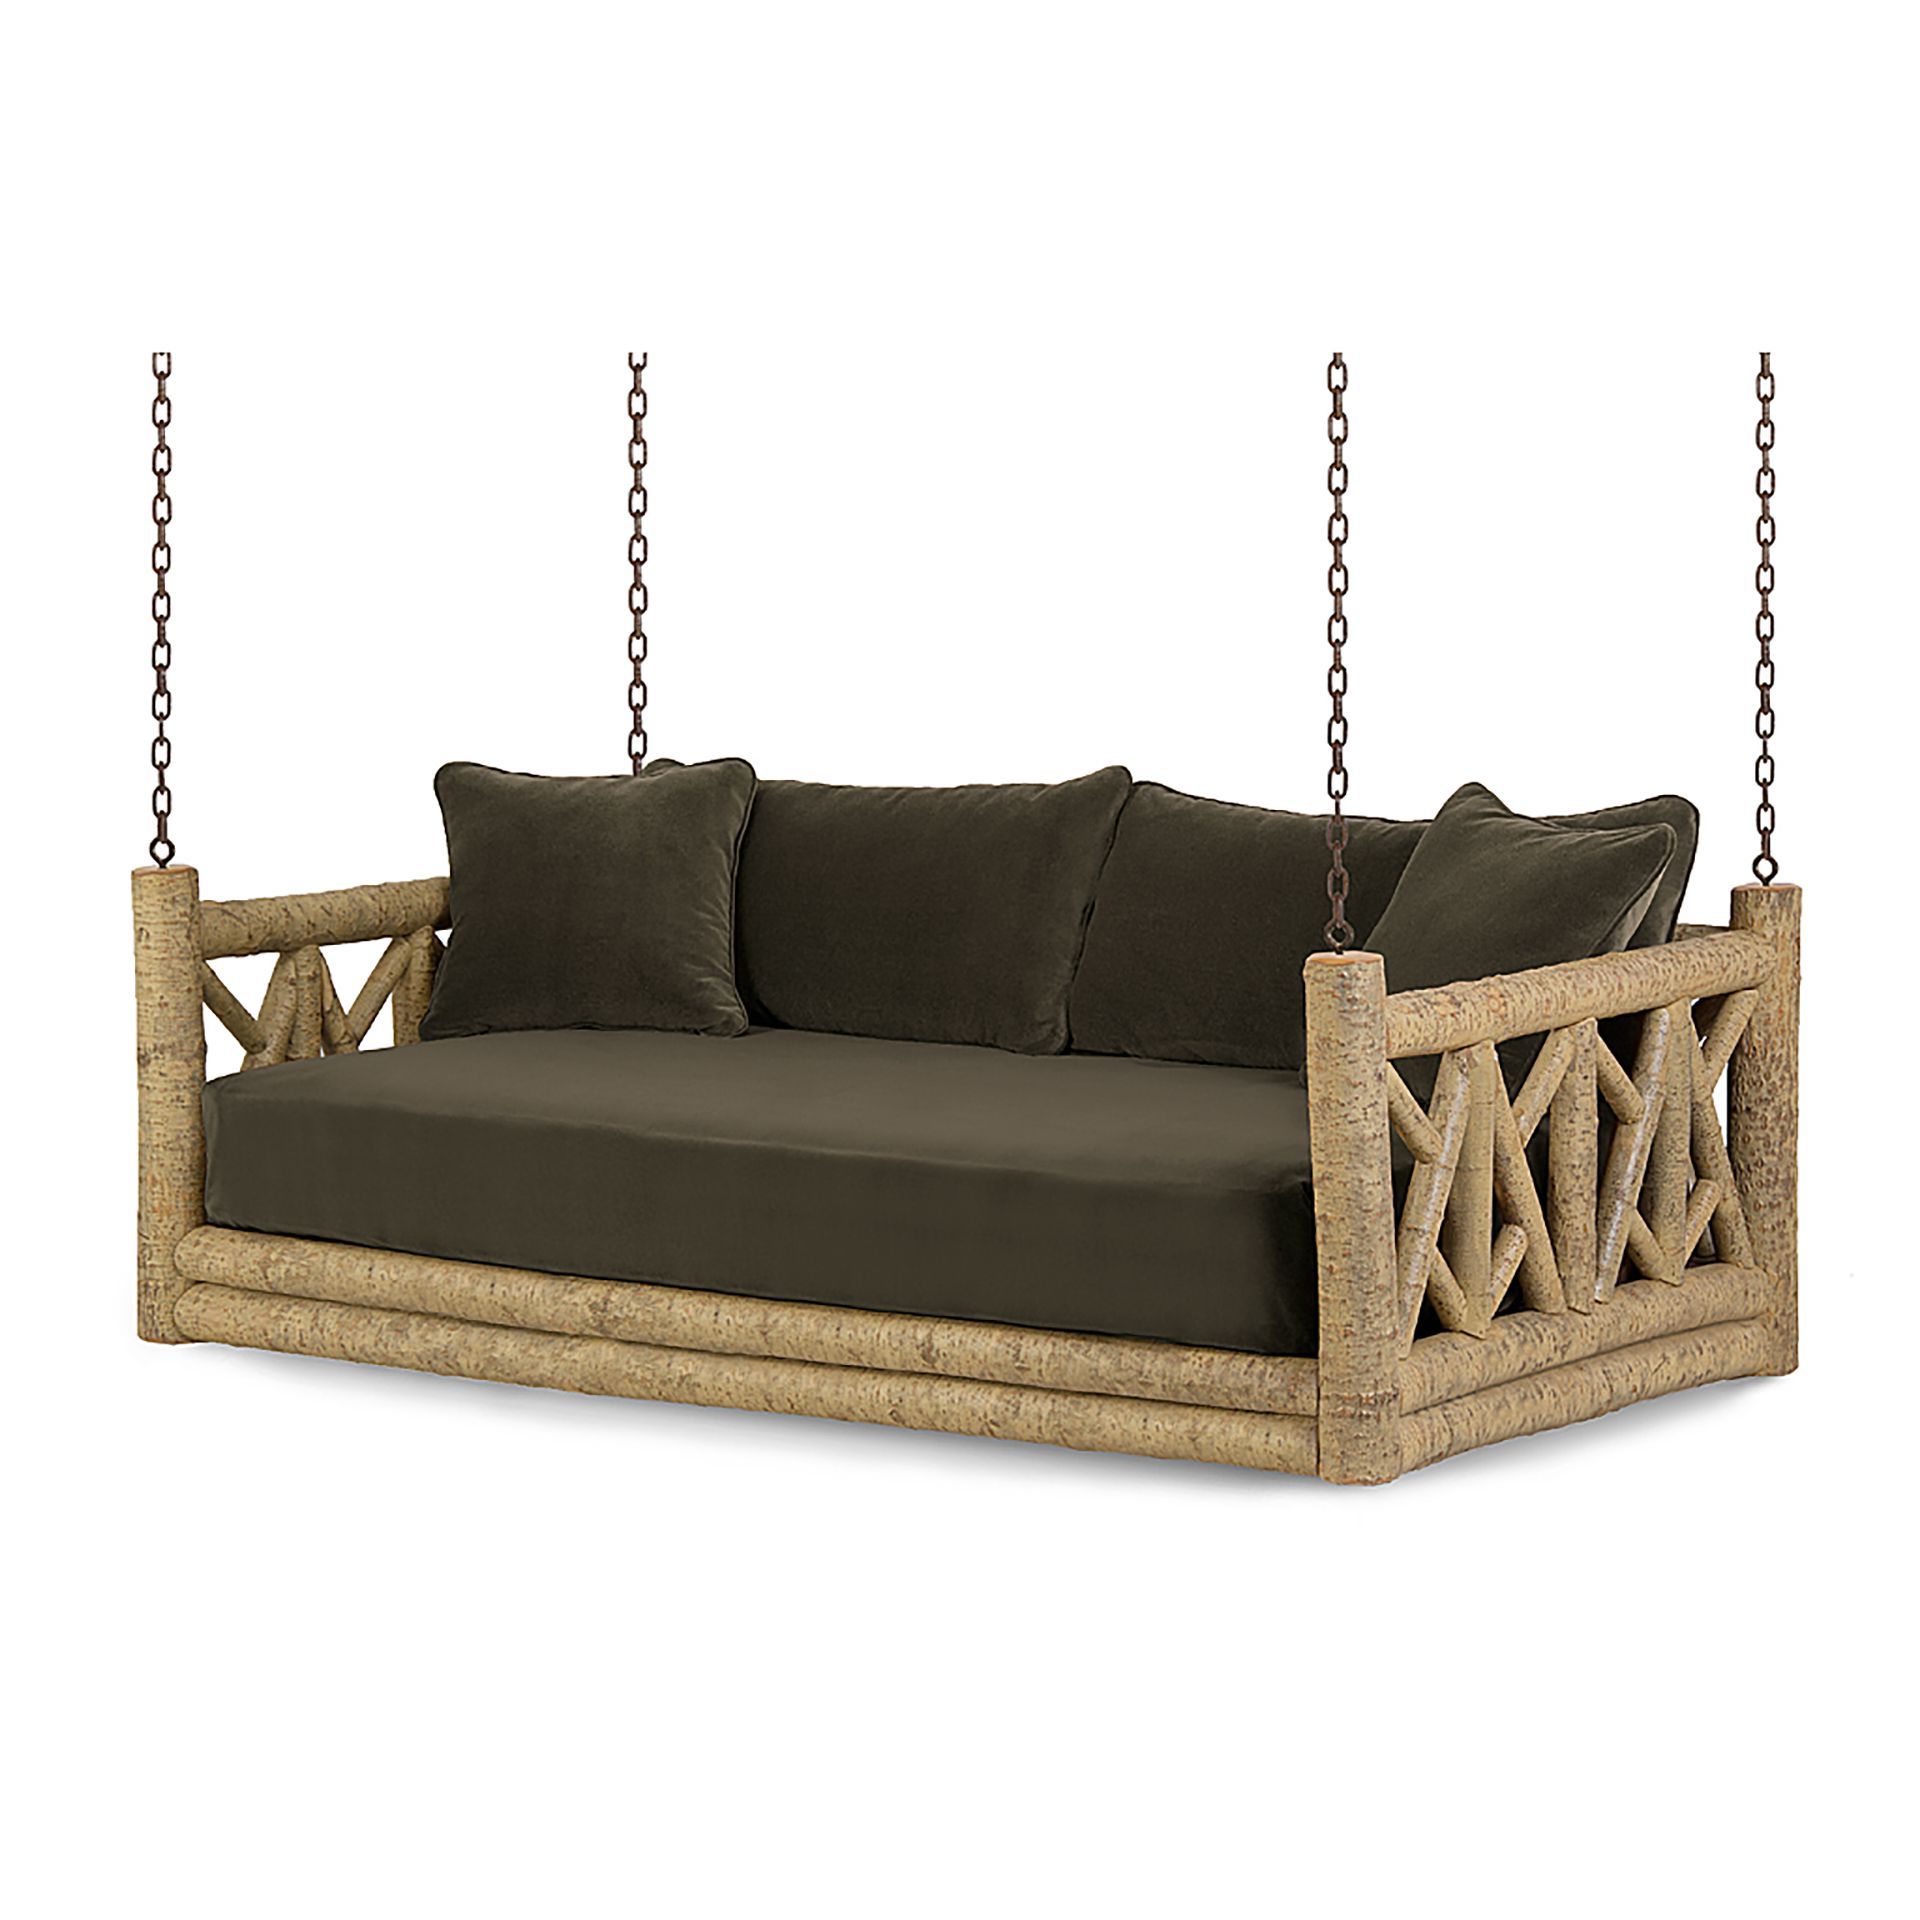 Newest Country Style Hanging Daybed Swings With Regard To Rustic Hanging Daybed # (View 1 of 30)